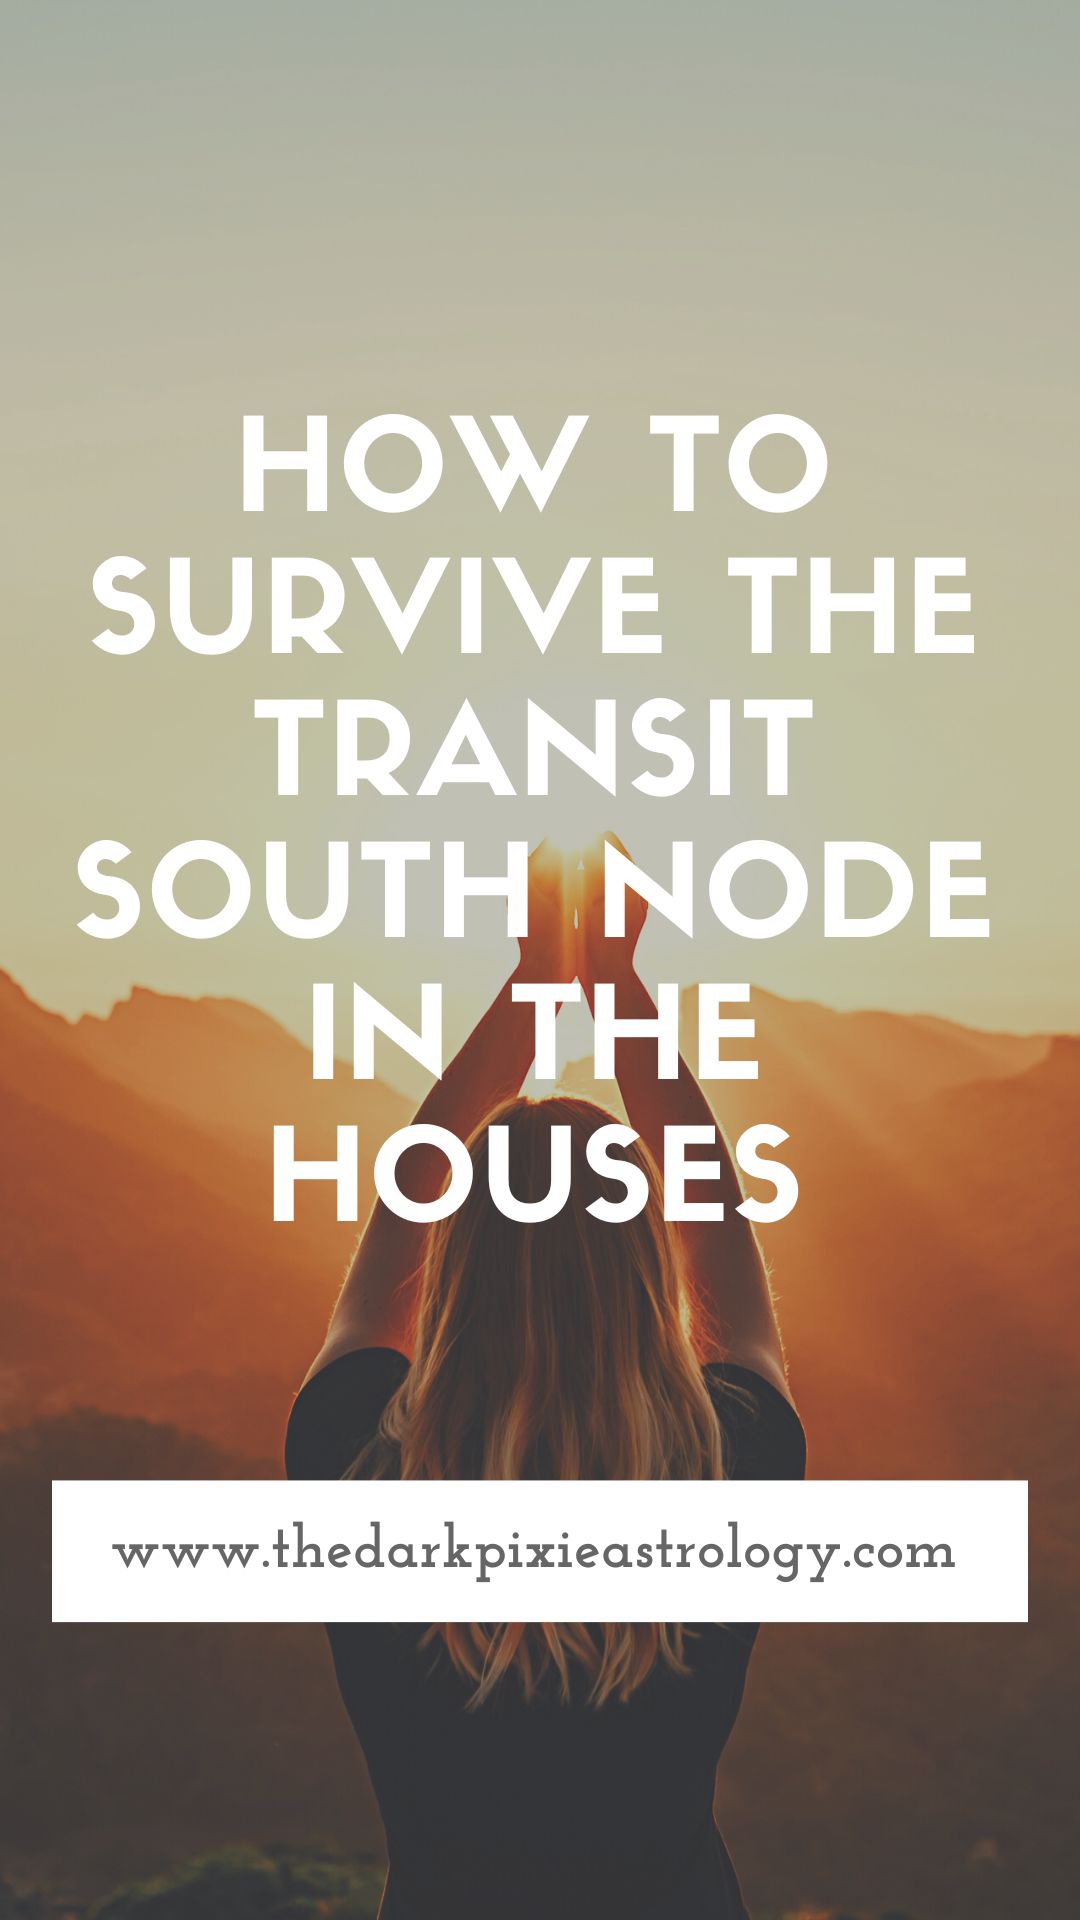 How to Survive the Transit South Node in the Houses - The Dark Pixie Astrology